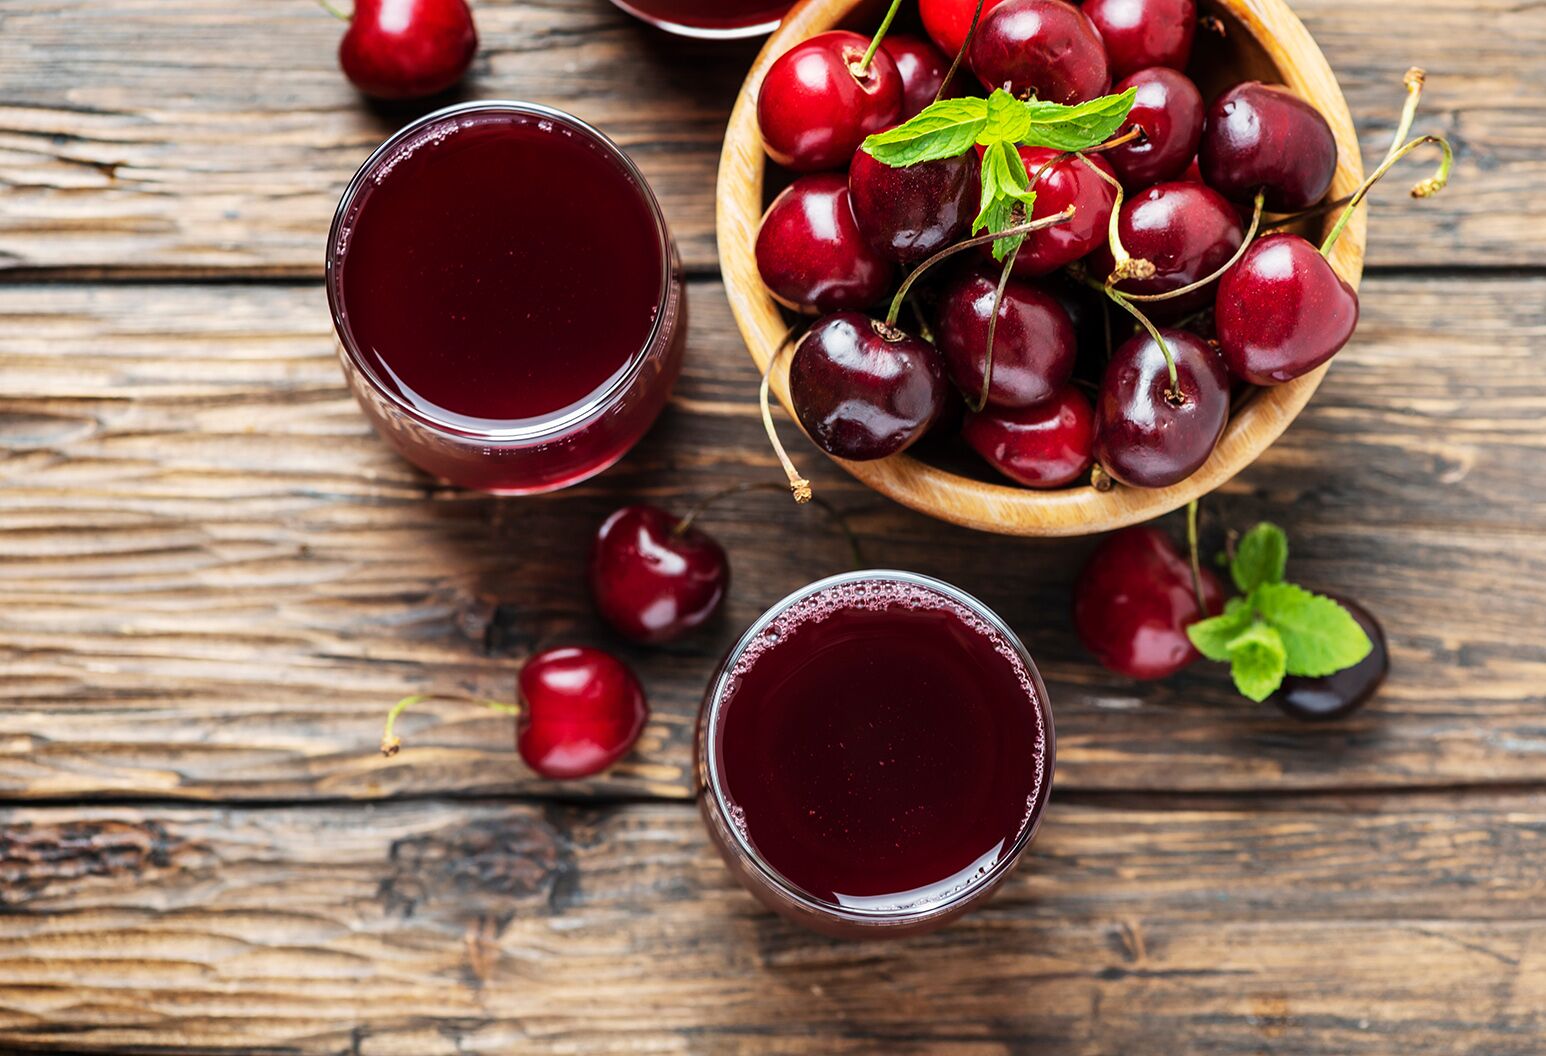 Tart cherry juice for digestive disorders